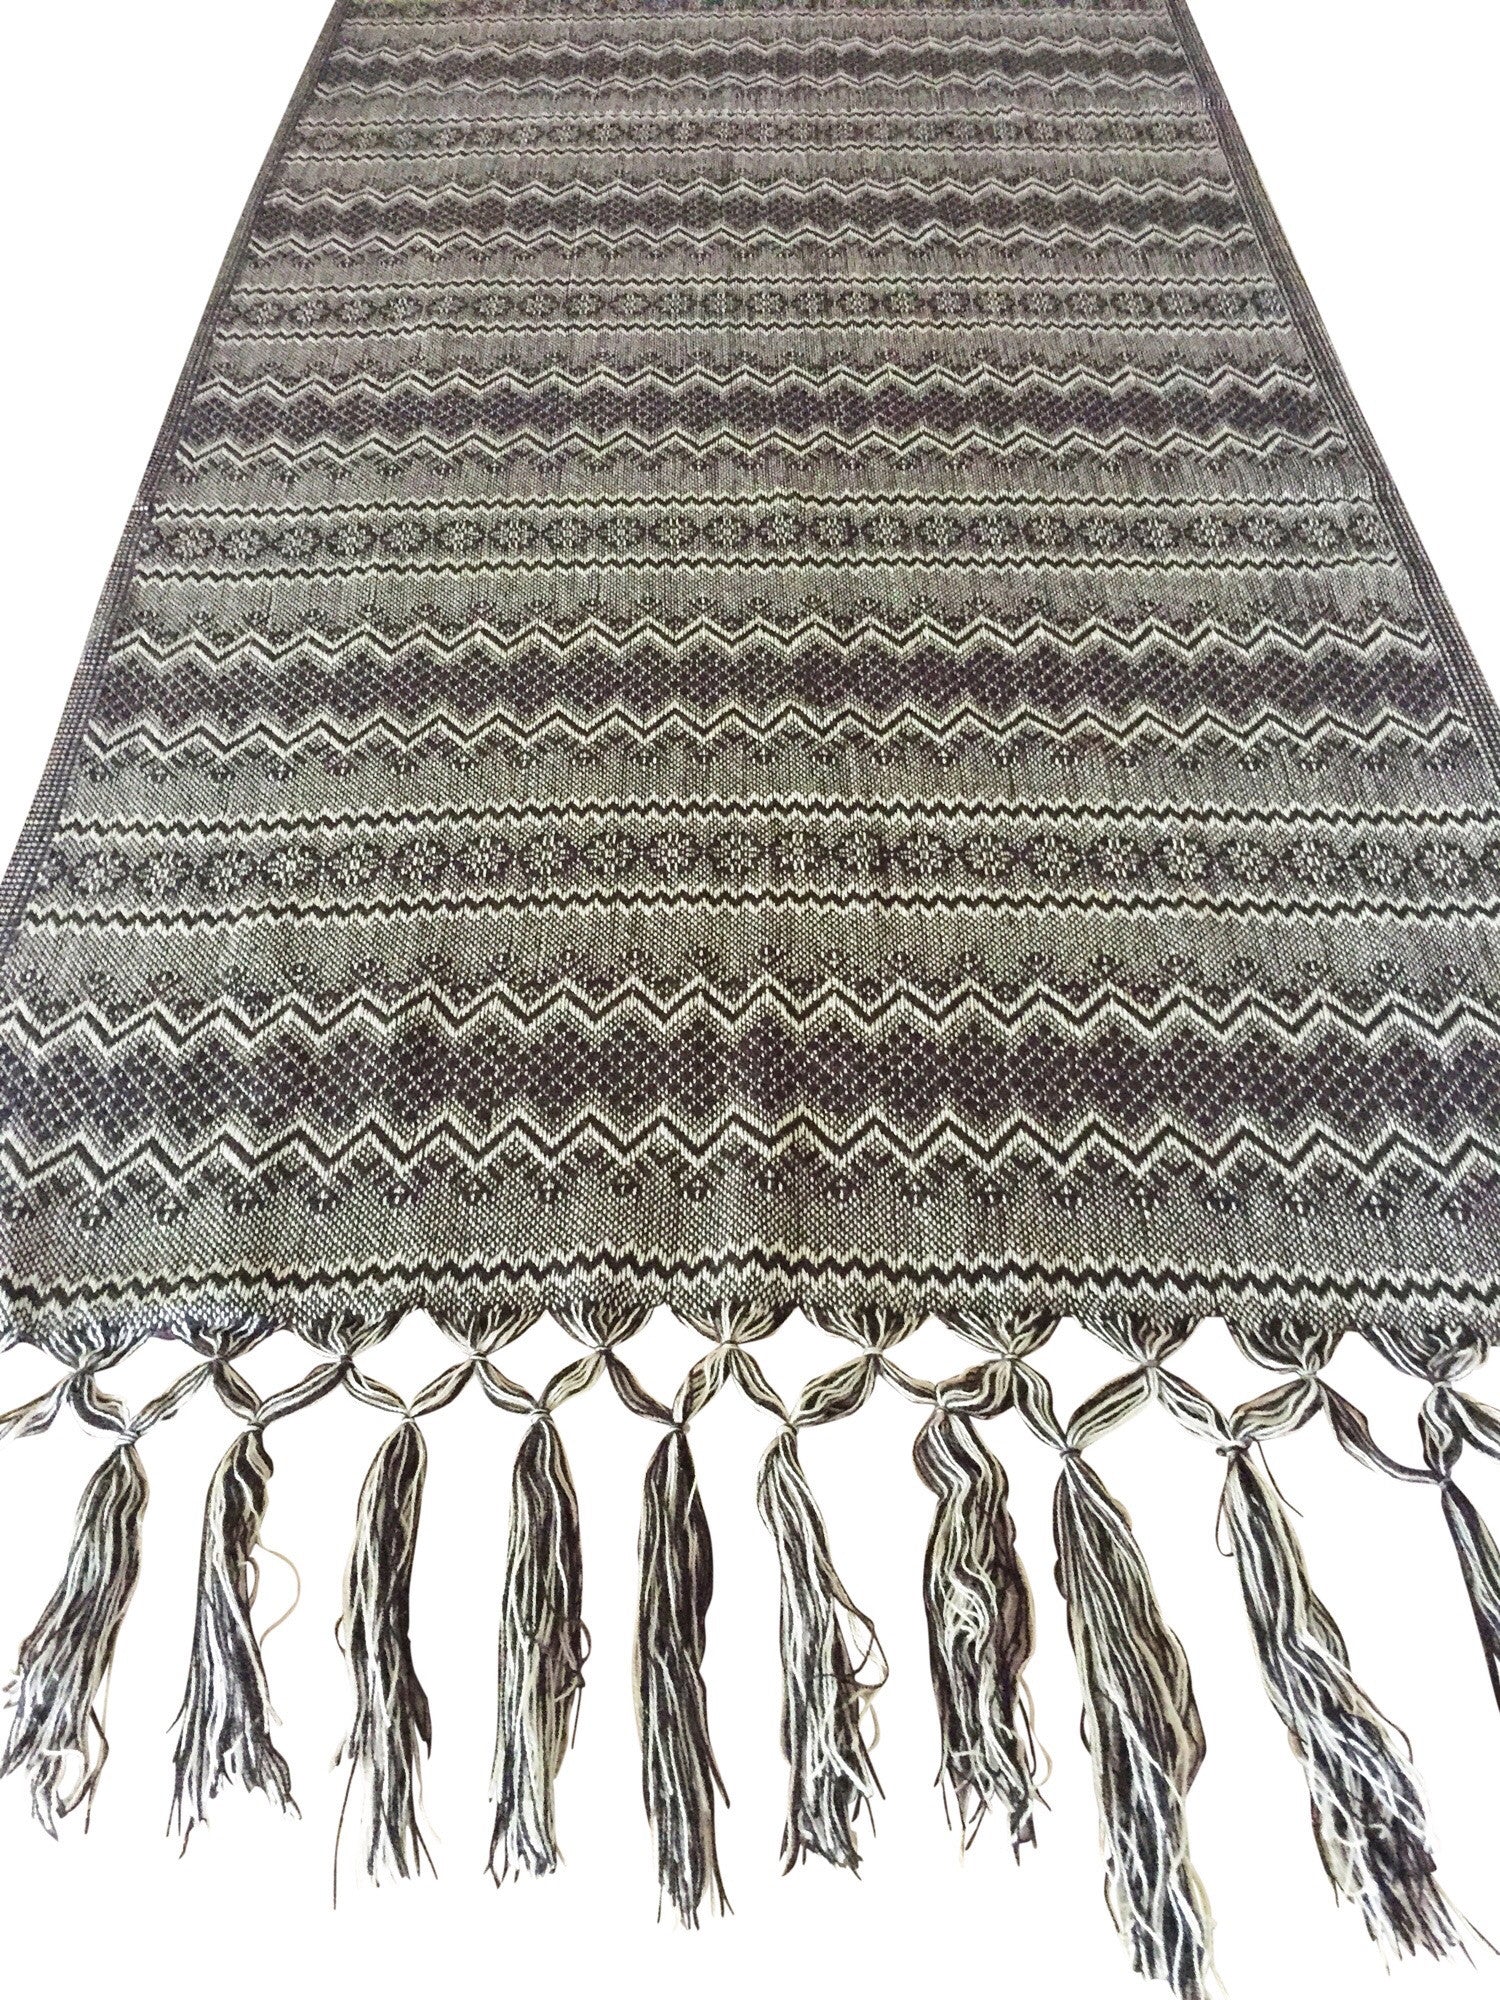 Handwoven Mexican Blanket or throw -Lightweight - MesaChic - 2